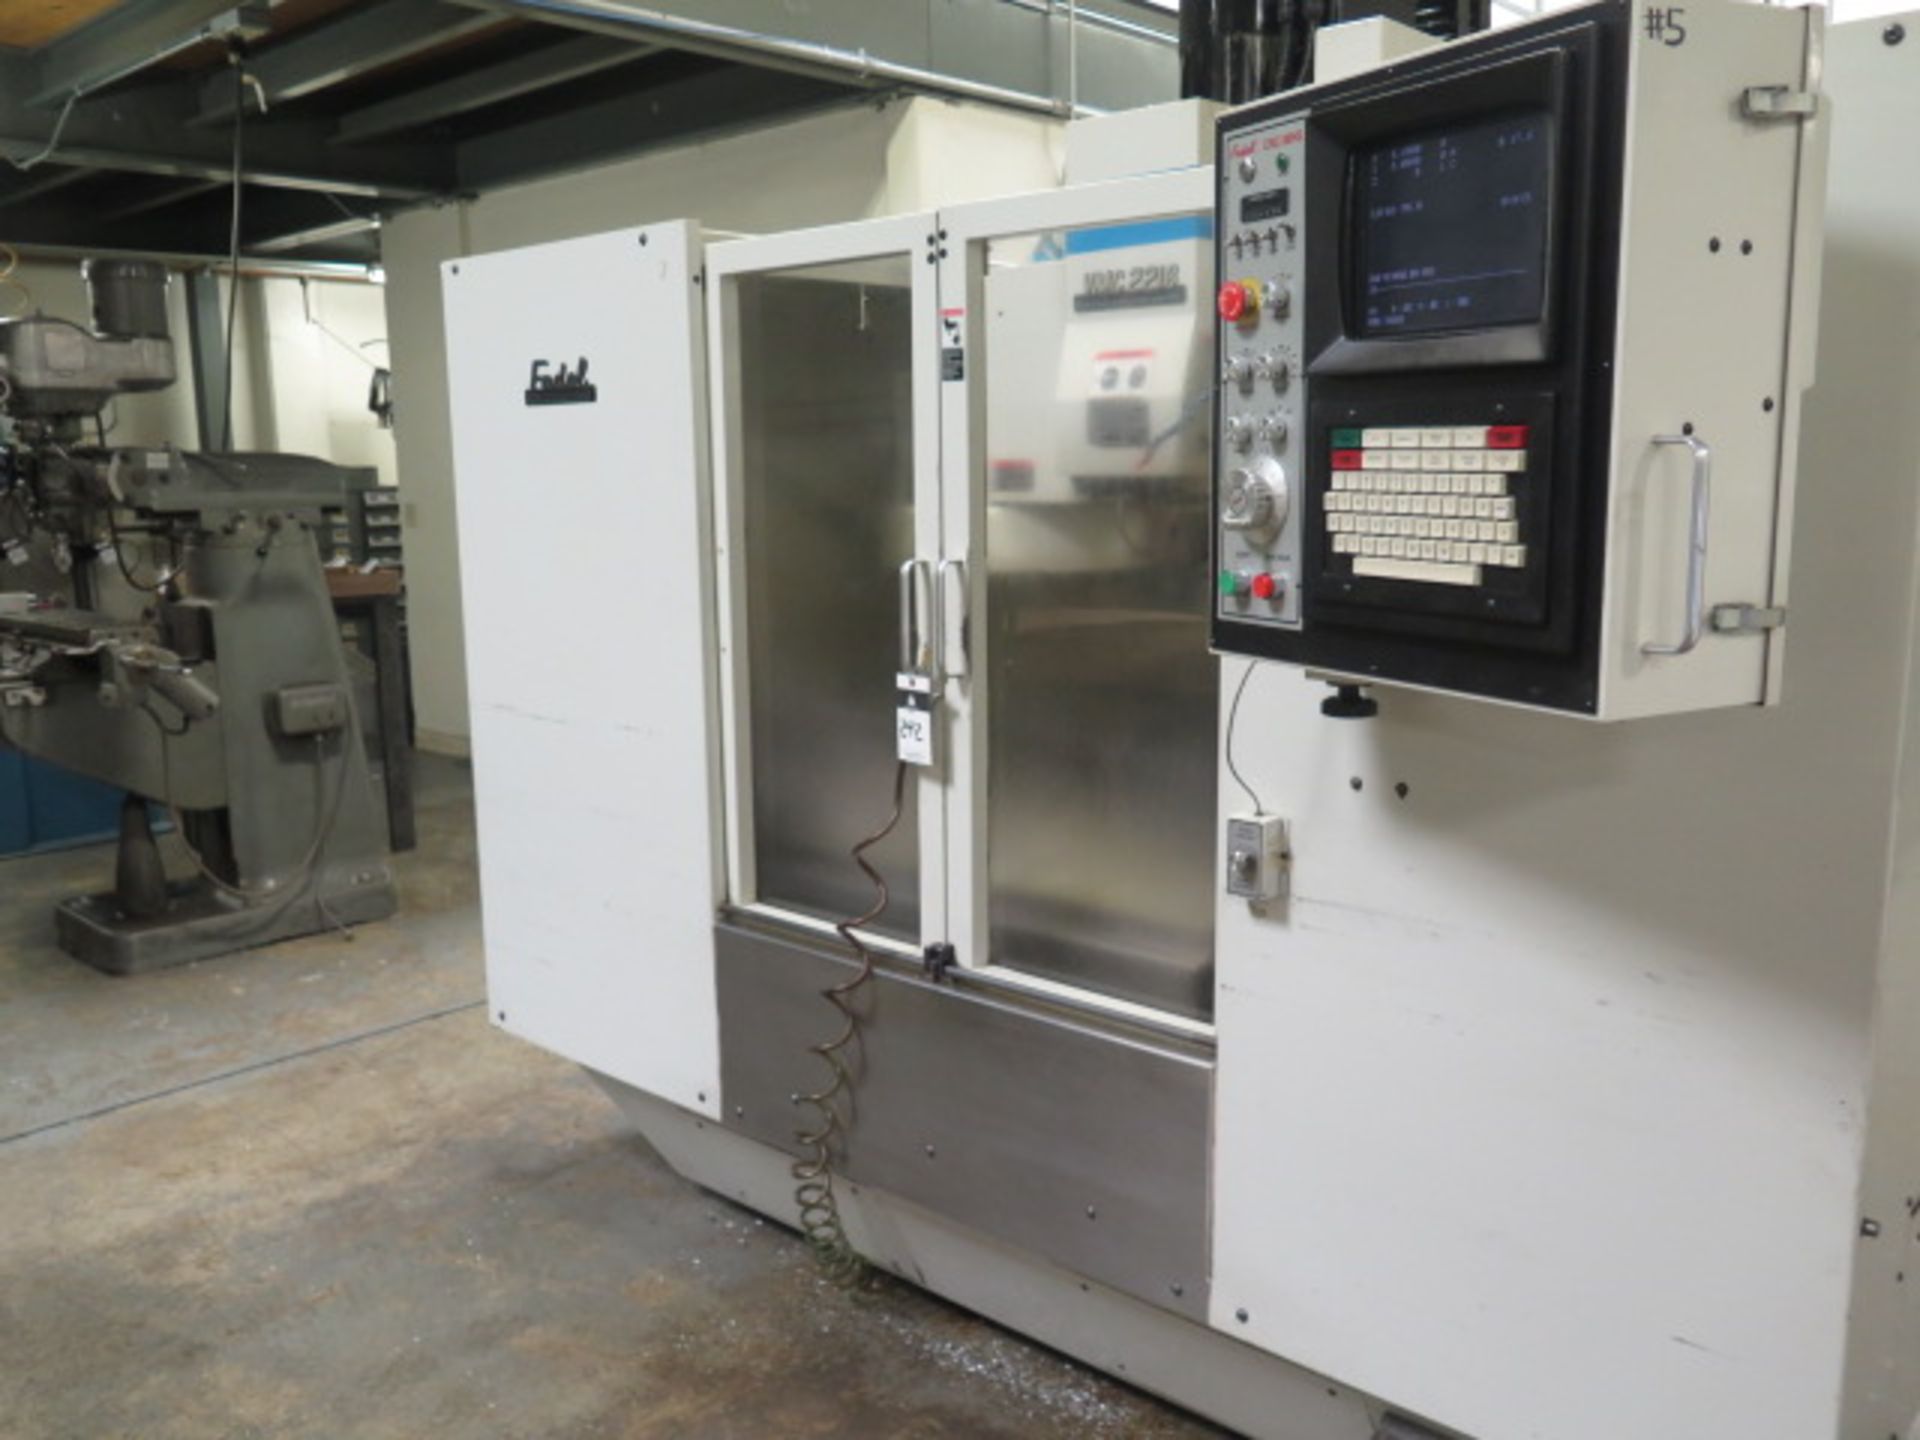 1997 Fadal VMC2216 CNC Vertical Machining Center s/n 9704636 w/ Fadal CNC88HS Controls, 21-Statation - Image 3 of 11